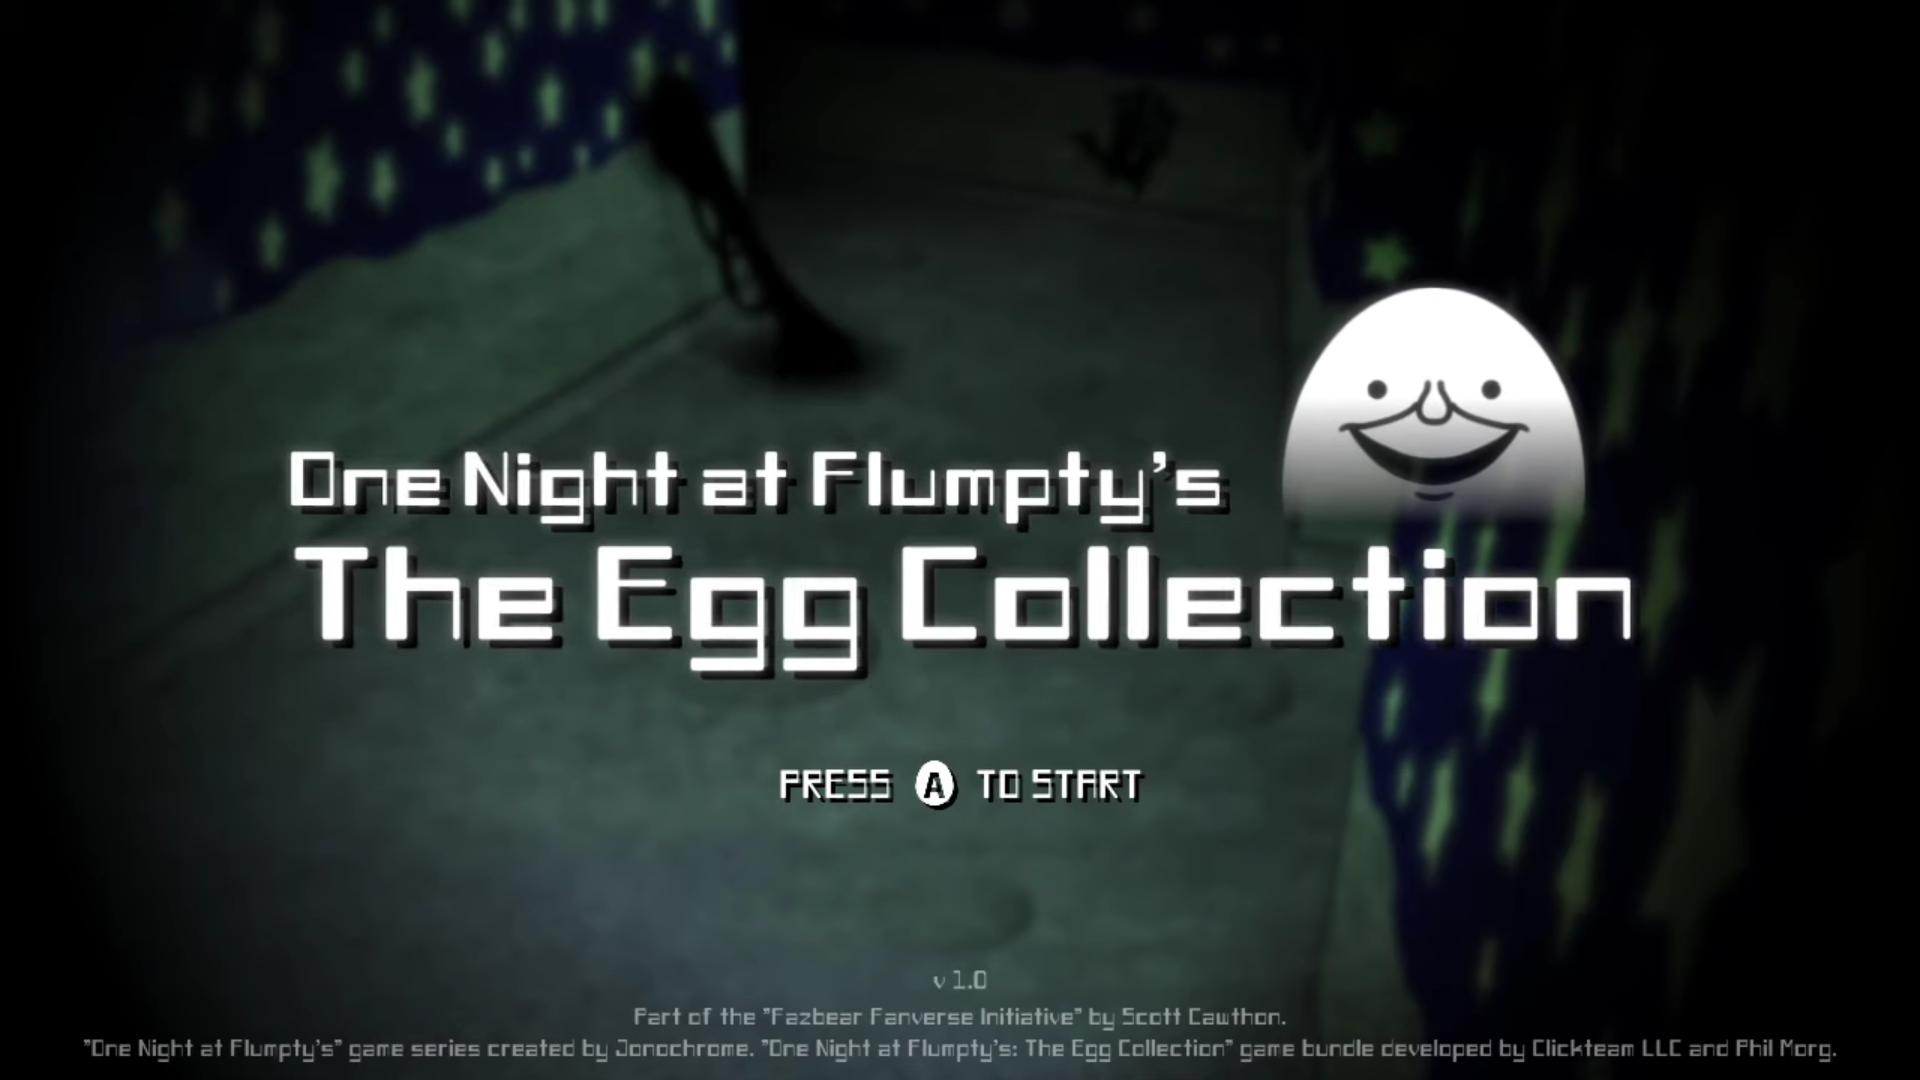 Download One Night at Flumpty's 2(You can experience the game